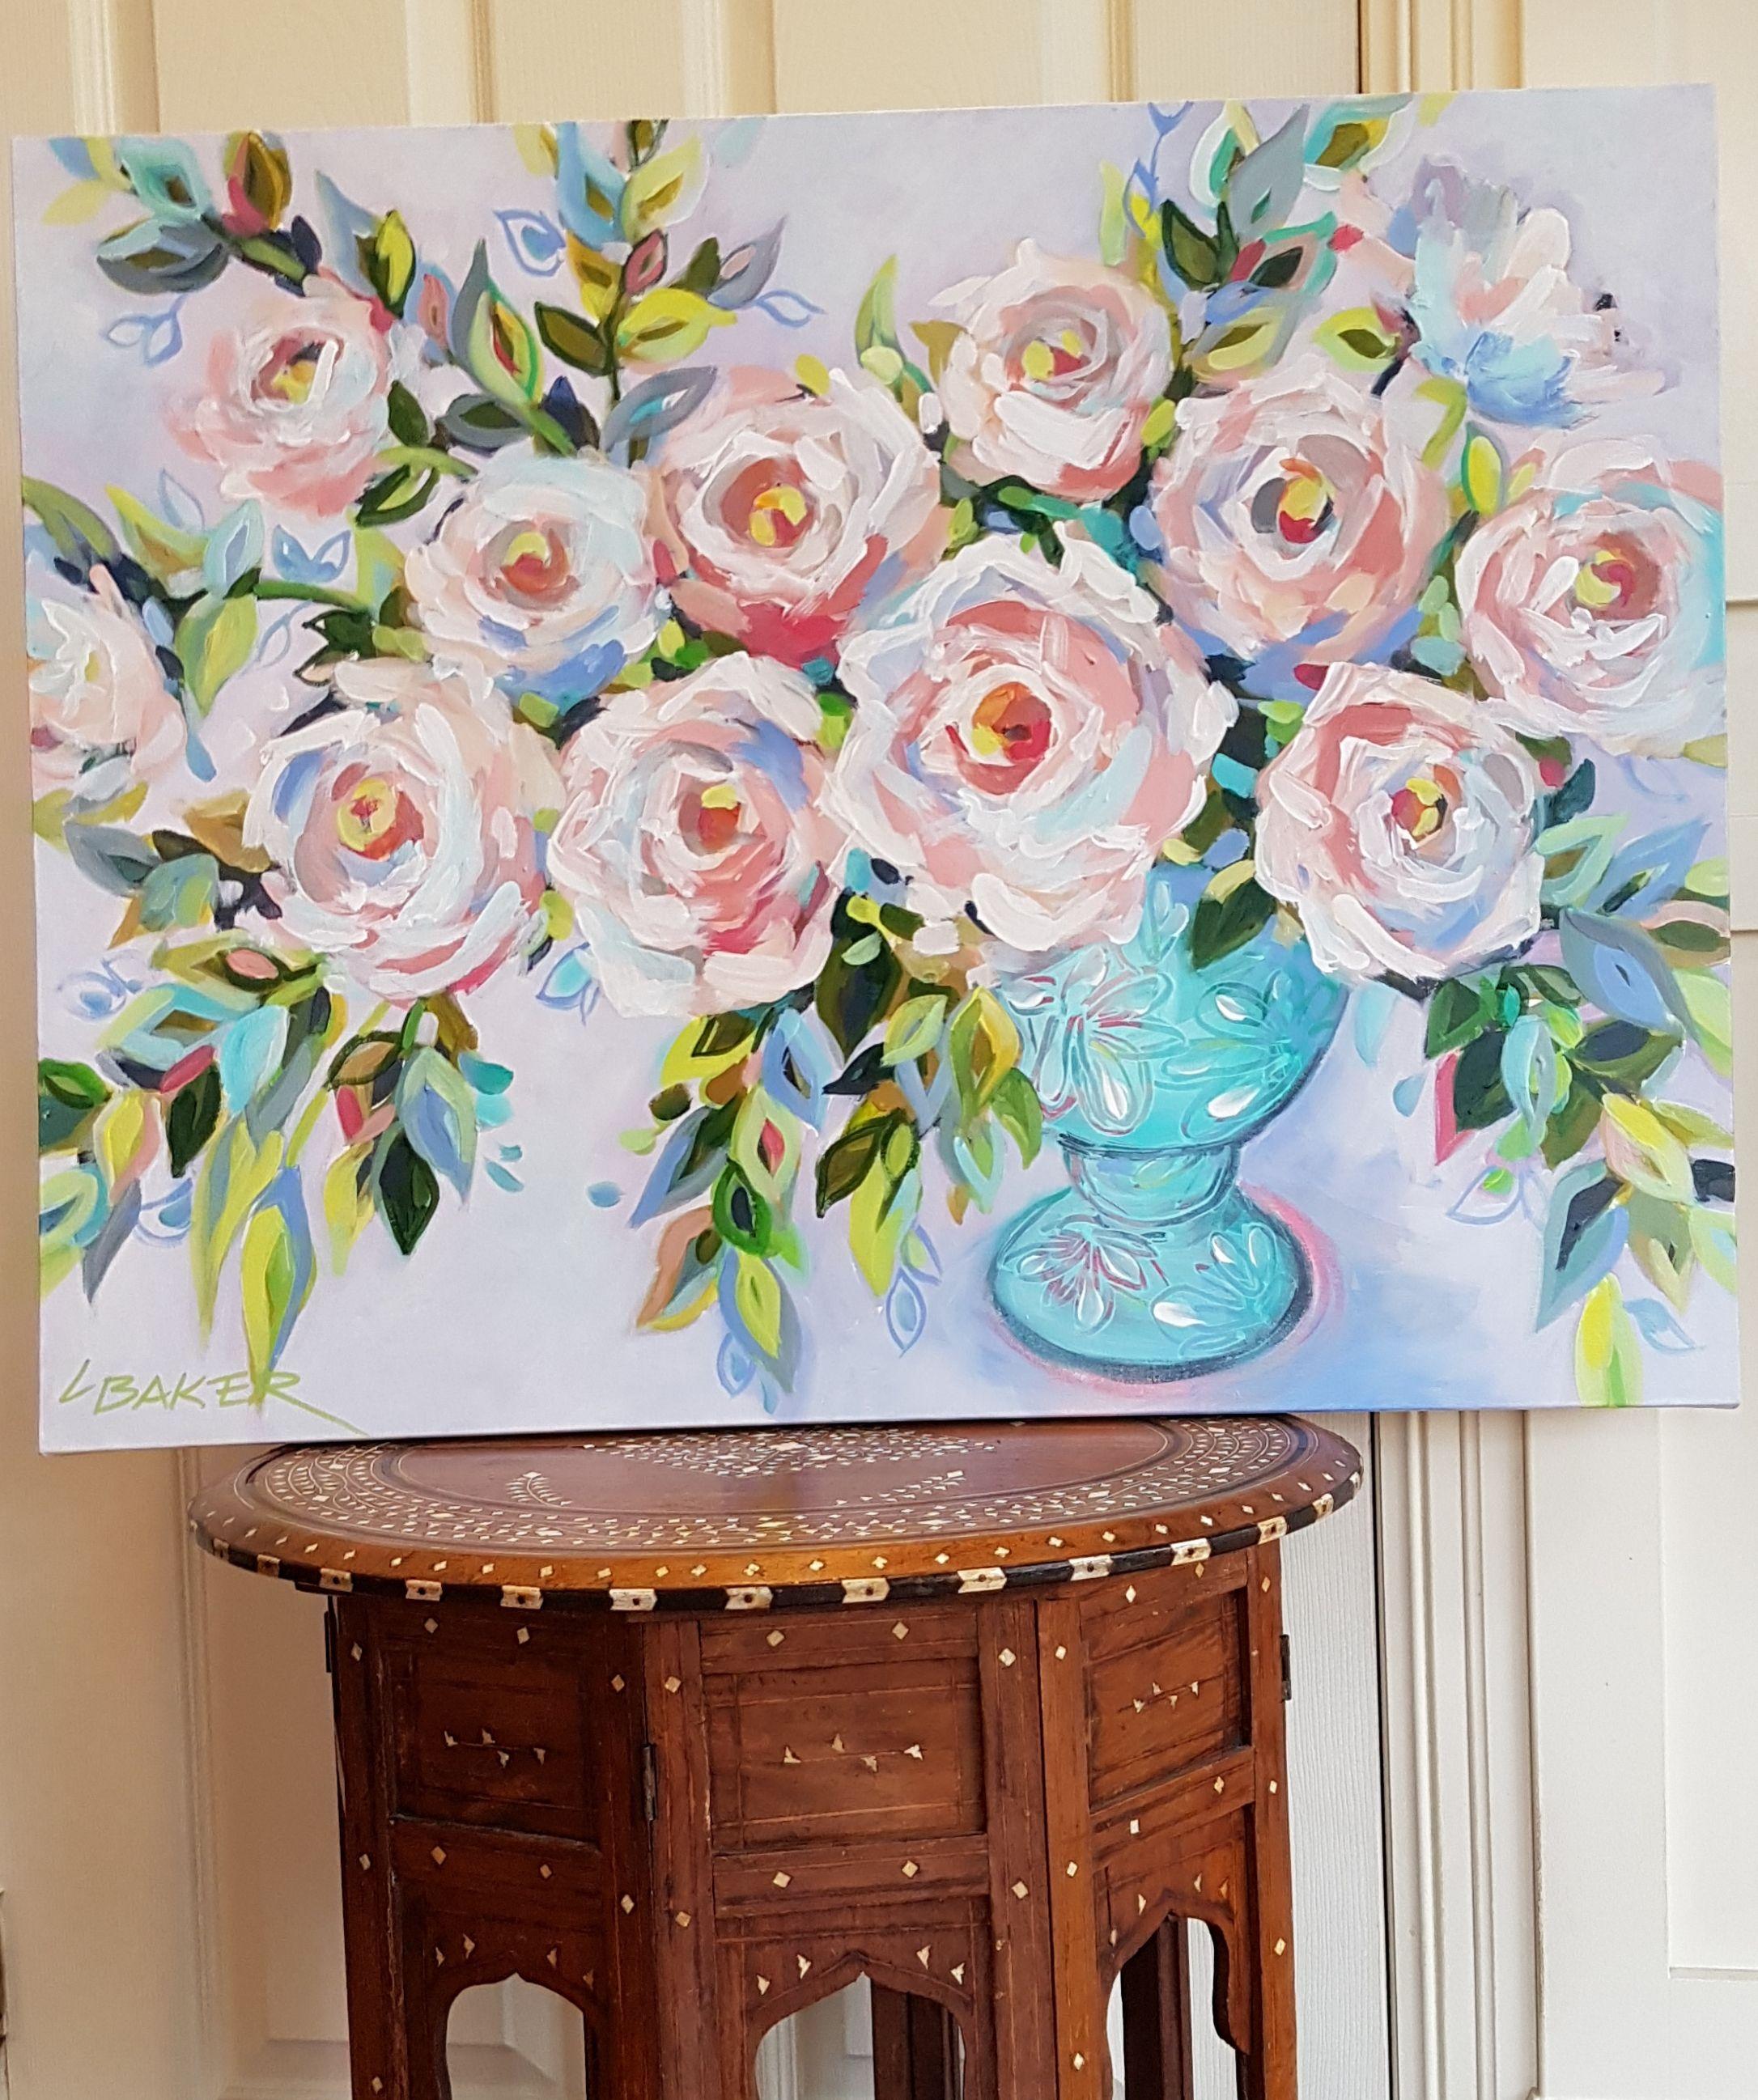 paintings of roses in acrylics